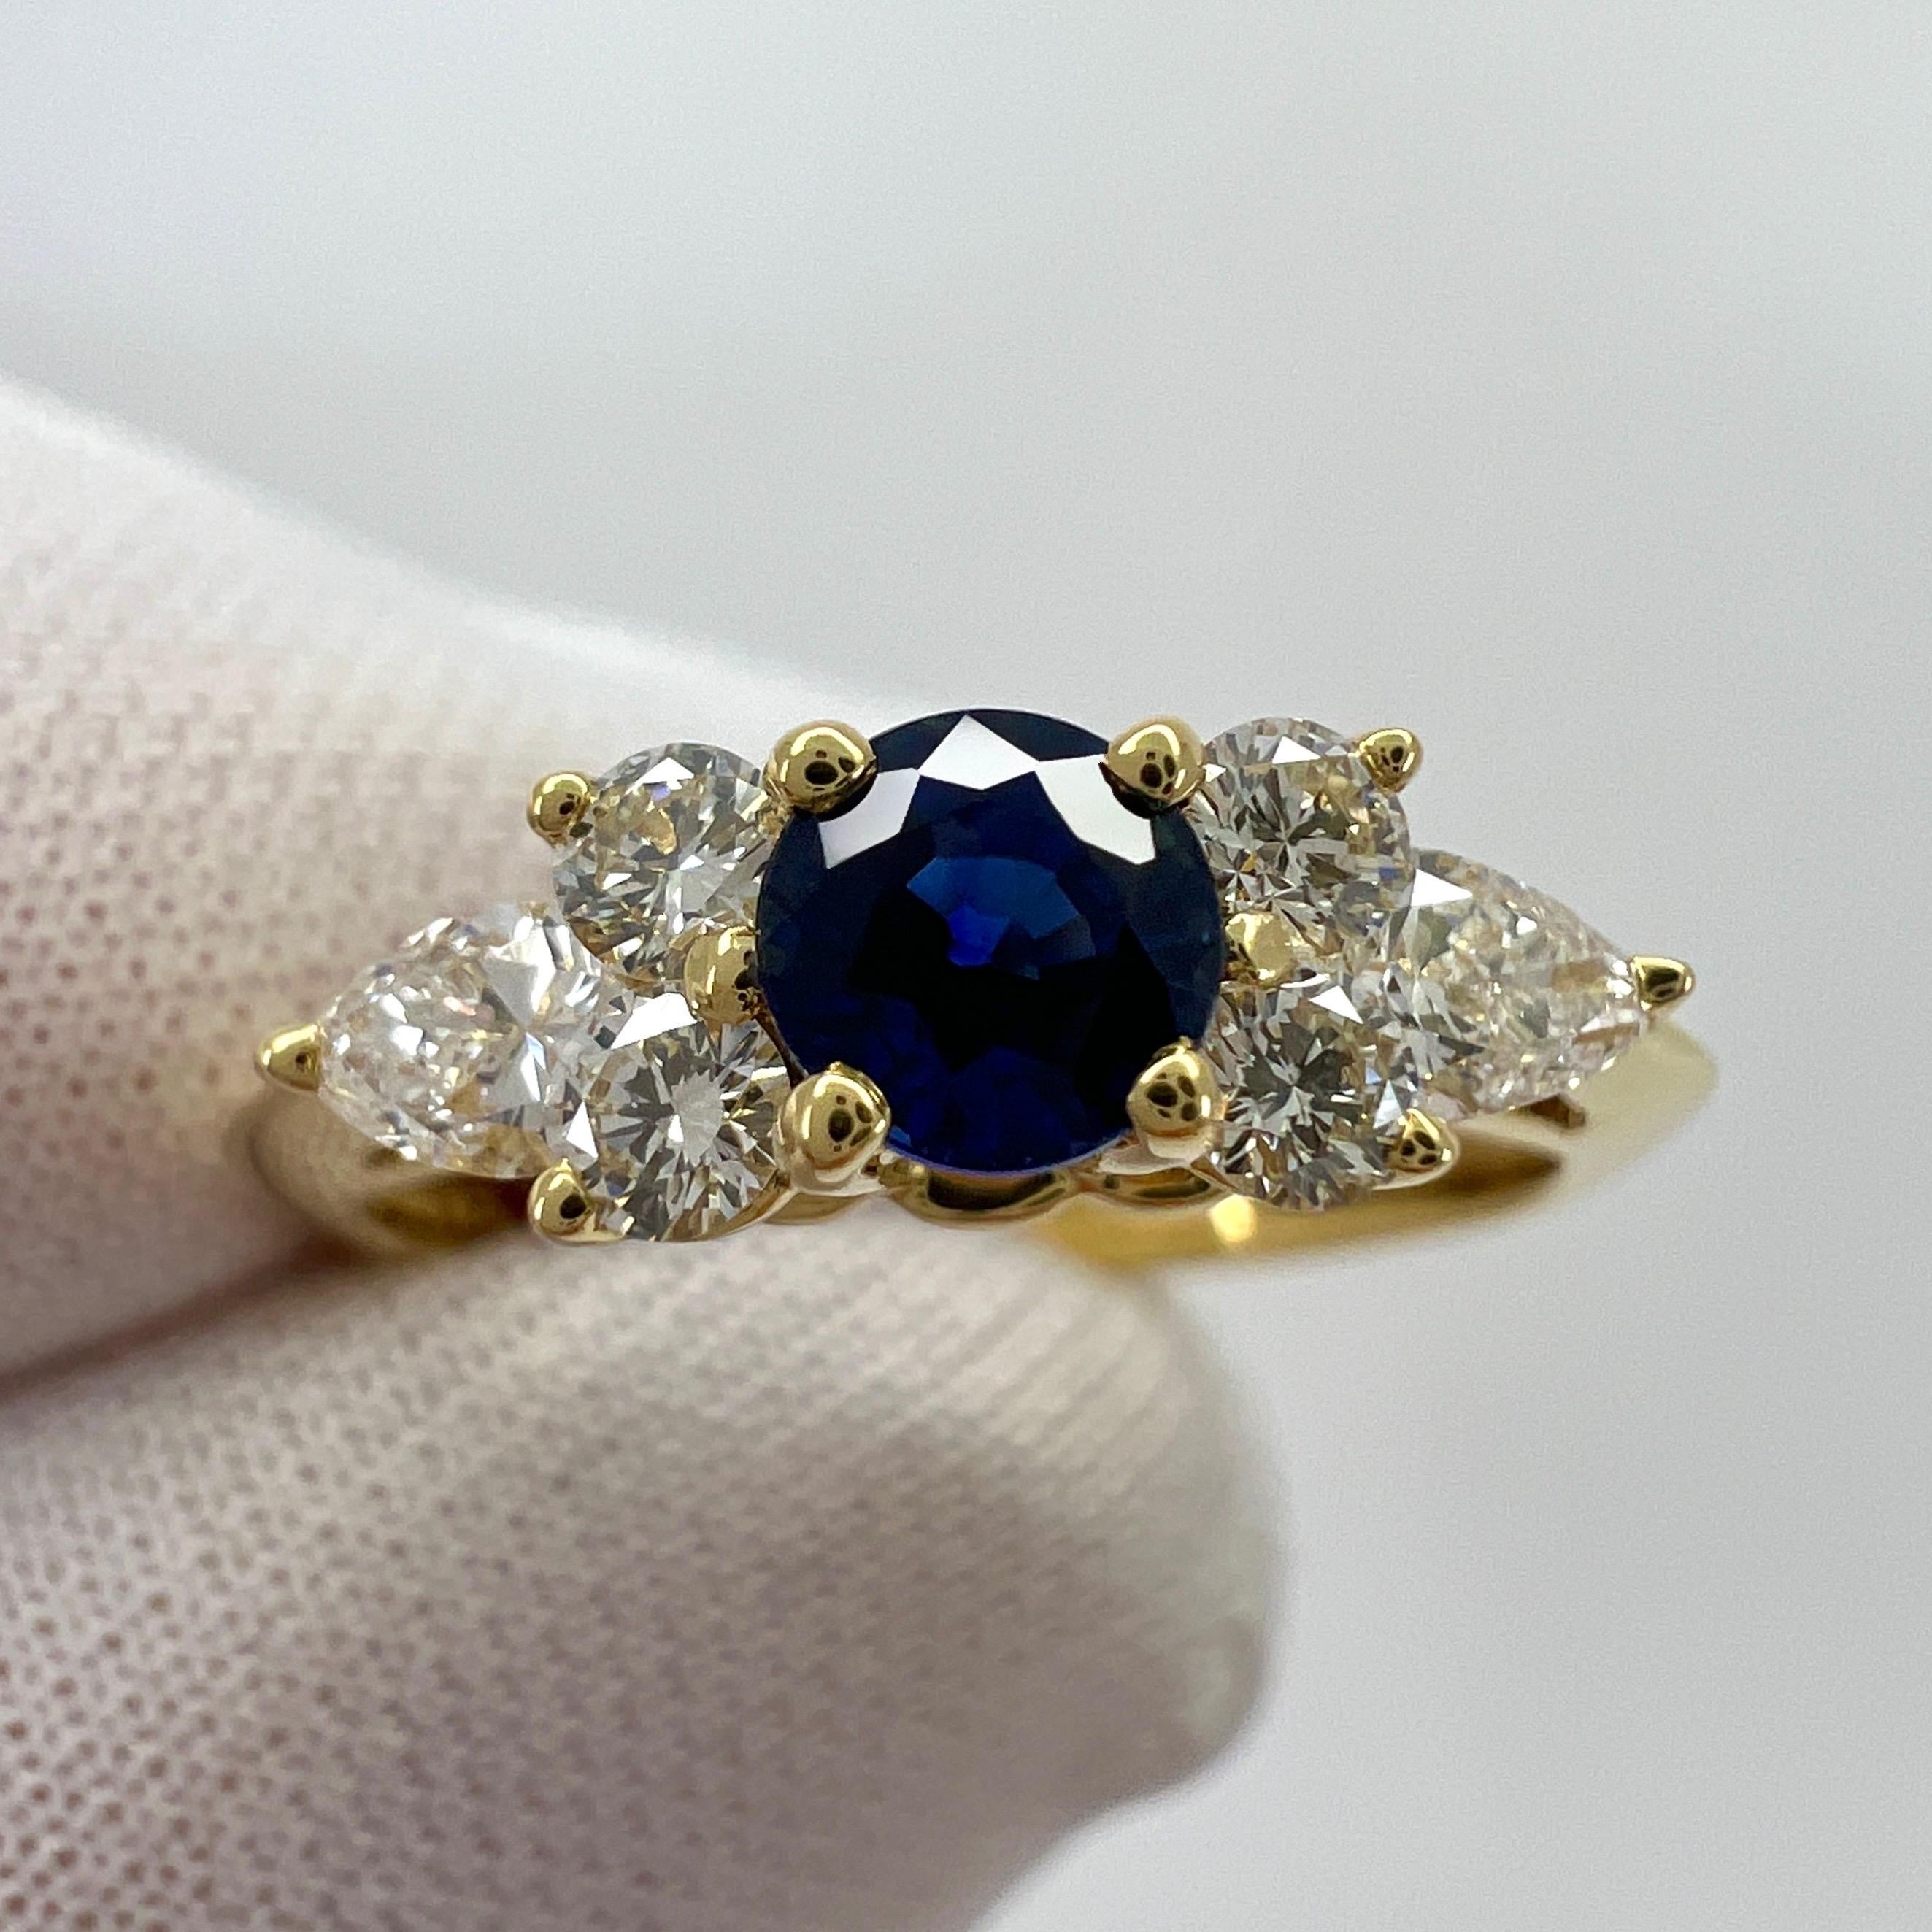 Rare Tiffany & Co. Sapphire & Diamond Buttercup 18k Yellow Gold Ring.

A beautifully made yellow gold cluster ring set with a stunning 4mm deep blue round cut sapphire. Superb colour, clarity and cut. 

Surrounded by x6 top quality colourless